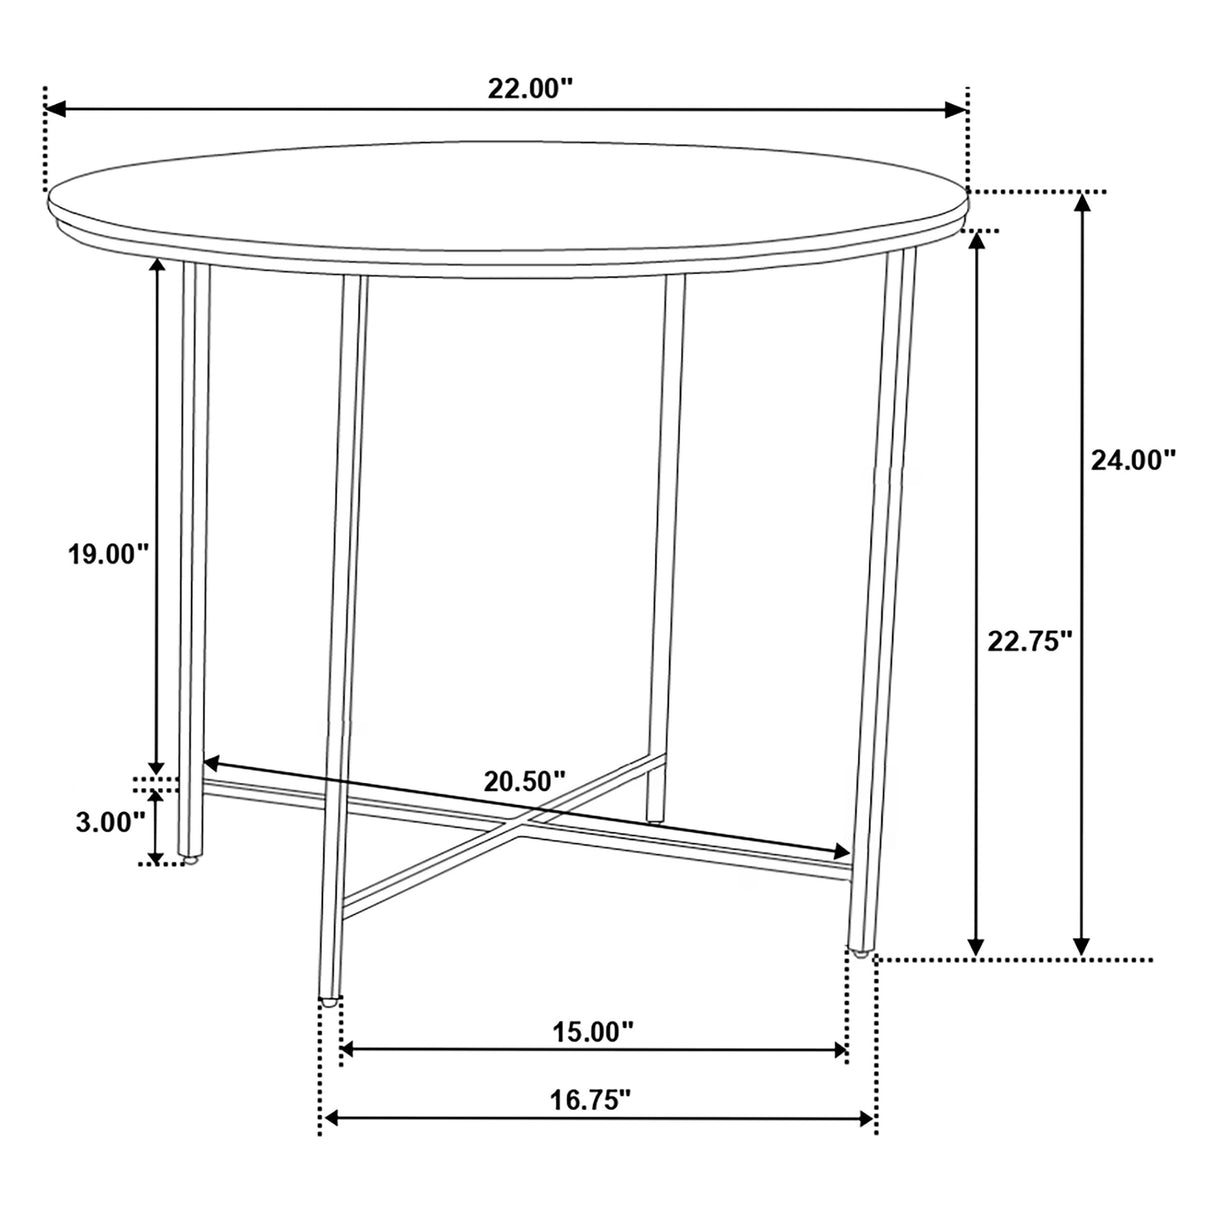 End Table - Ellison Round X-cross End Table White and Gold